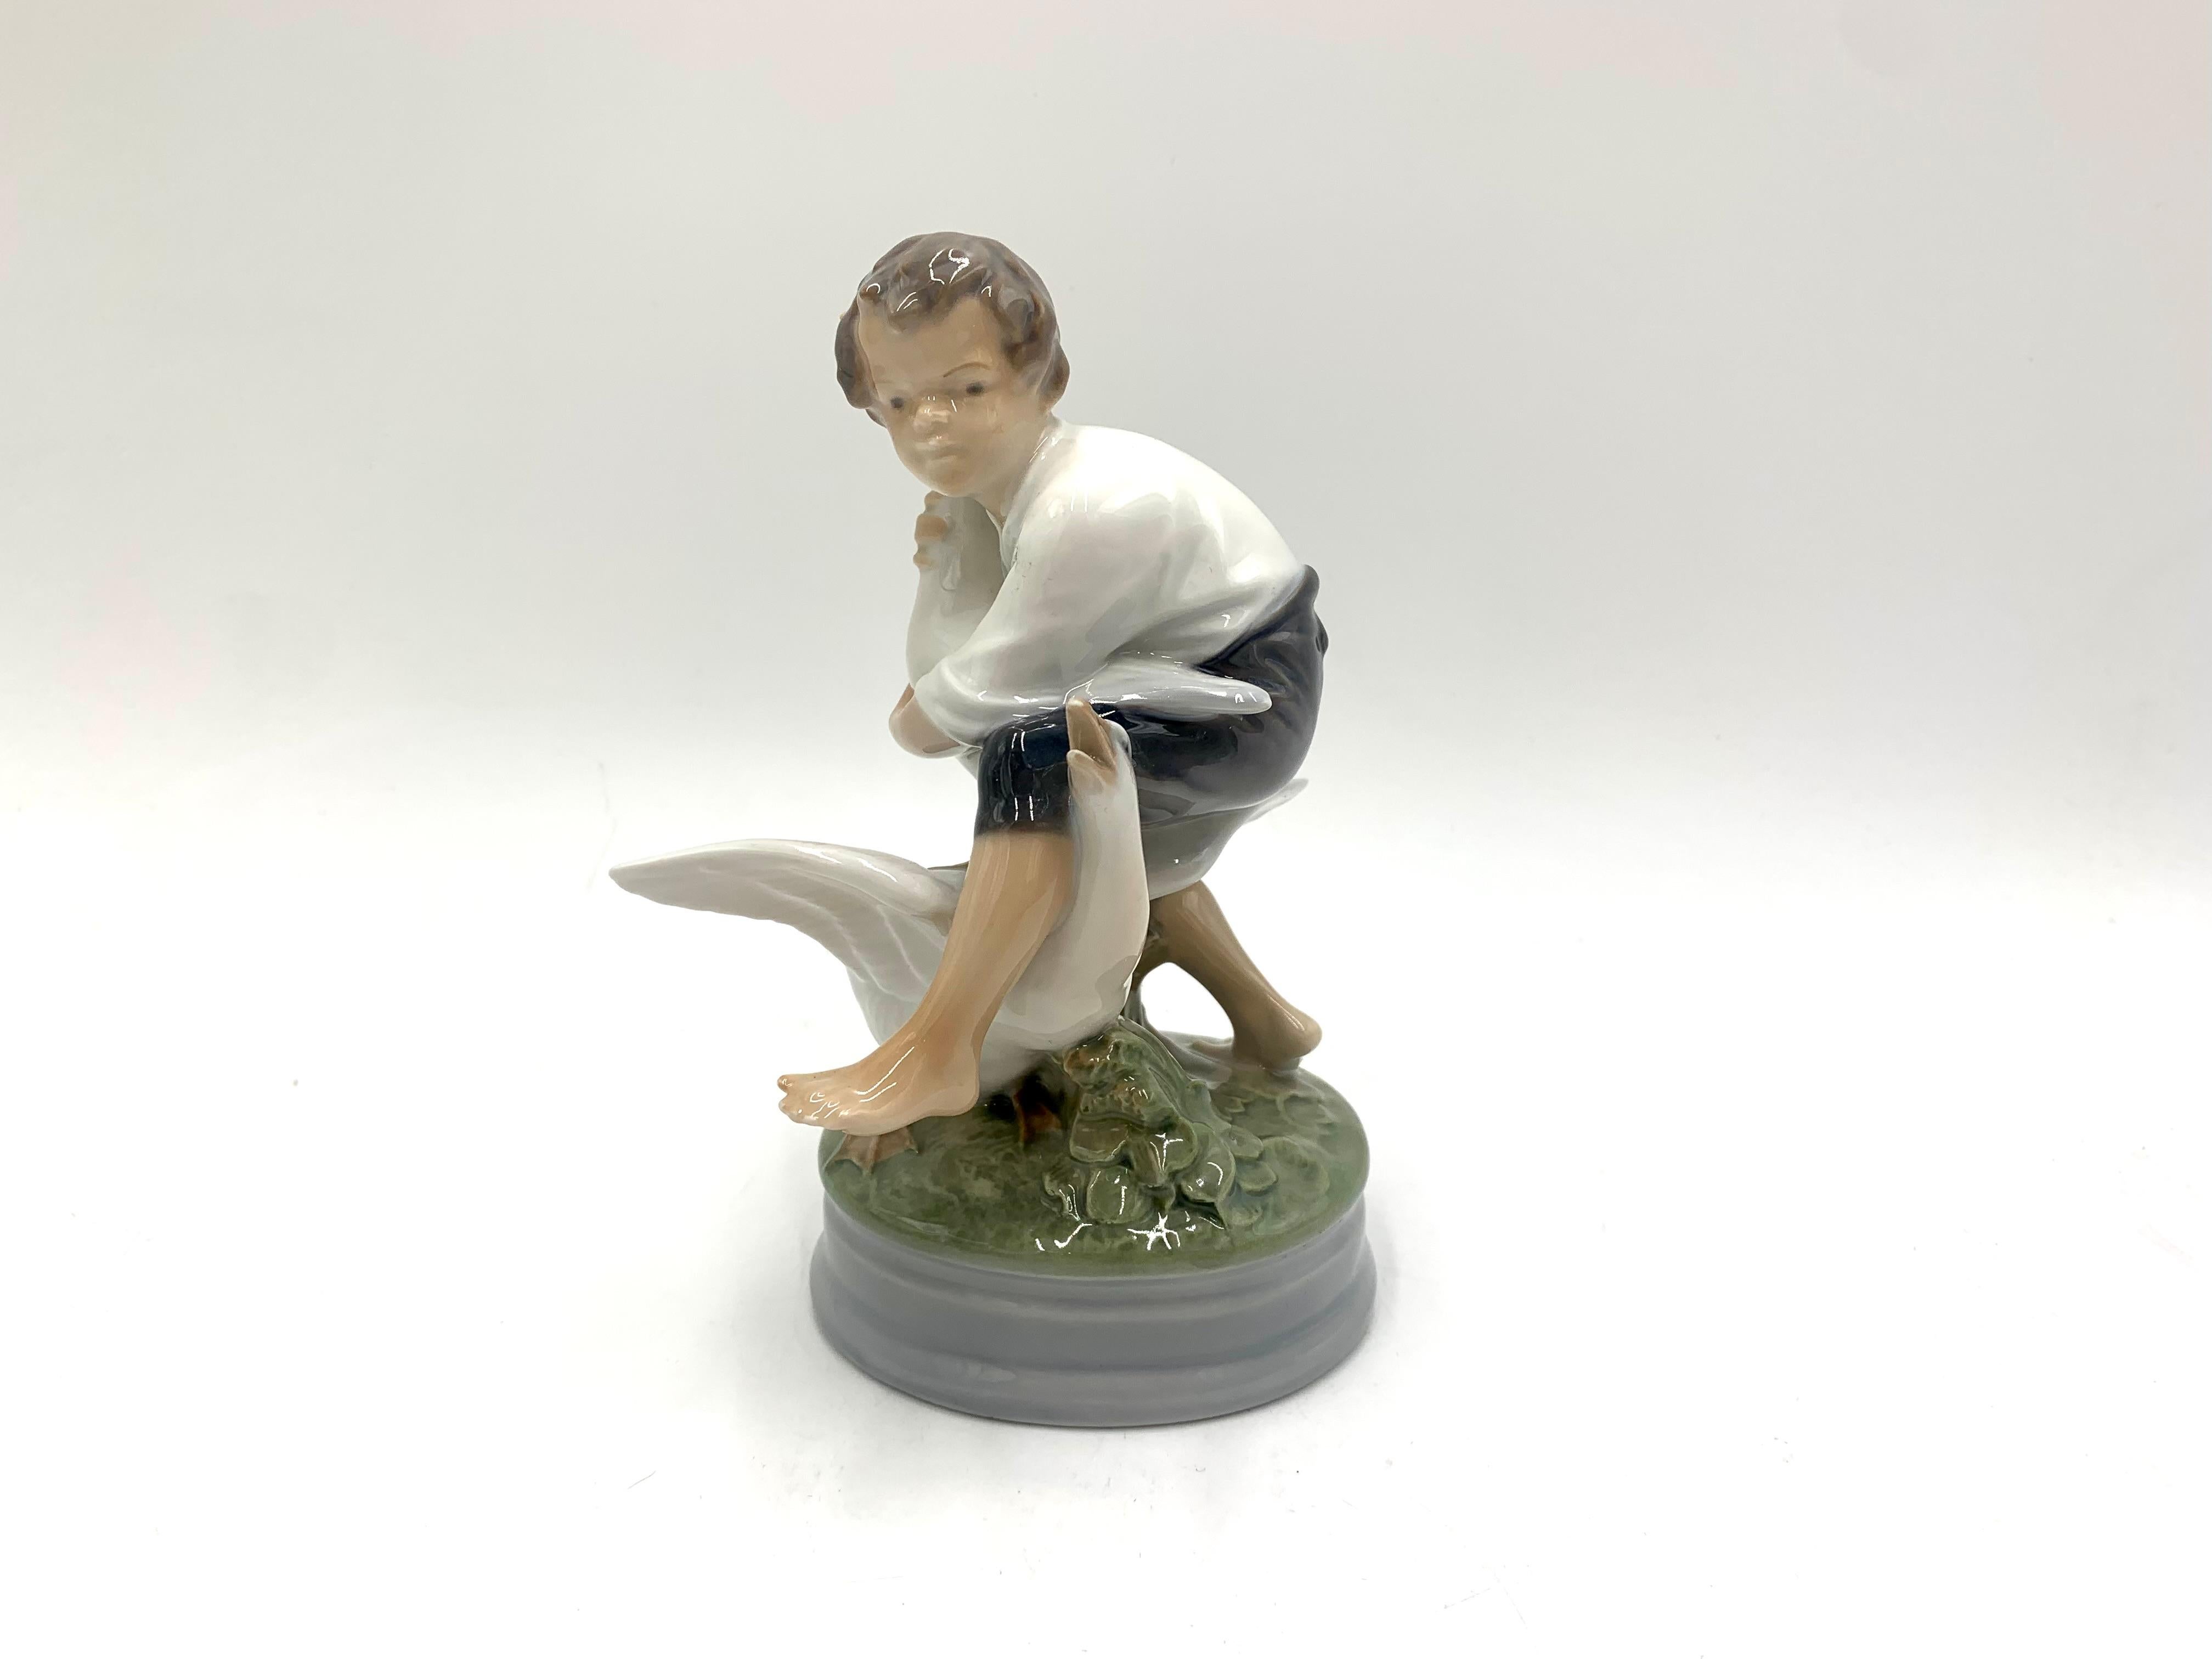 Porcelain figurine of a boy - goose thief.

Made in Denmark by the Royal Copenhagen manufactory

Manufactured in 1964.

Model number # 2139

Very good condition, 

Measures: height 17.5 width 9 cm depth 8 cm.